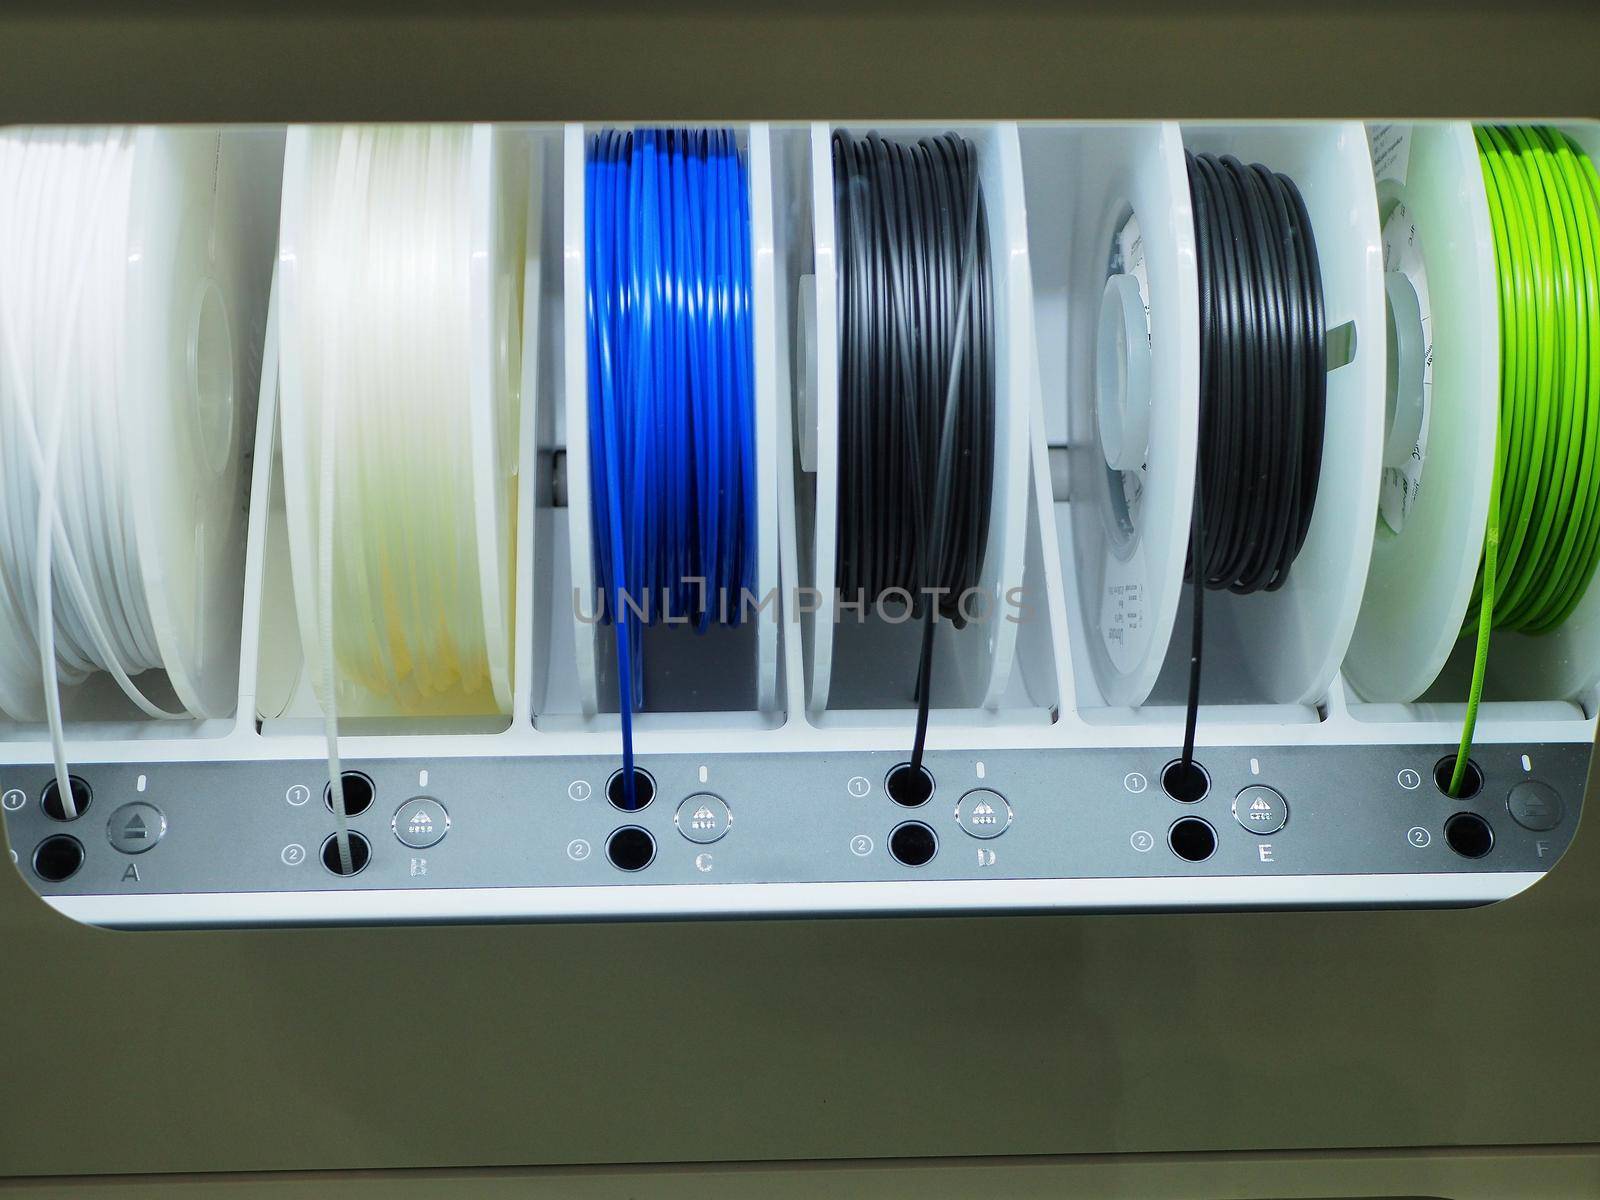 Spools of multicolor thermoplastic filament installed on 3d printer Turin Italy February 12 2020 by lemar